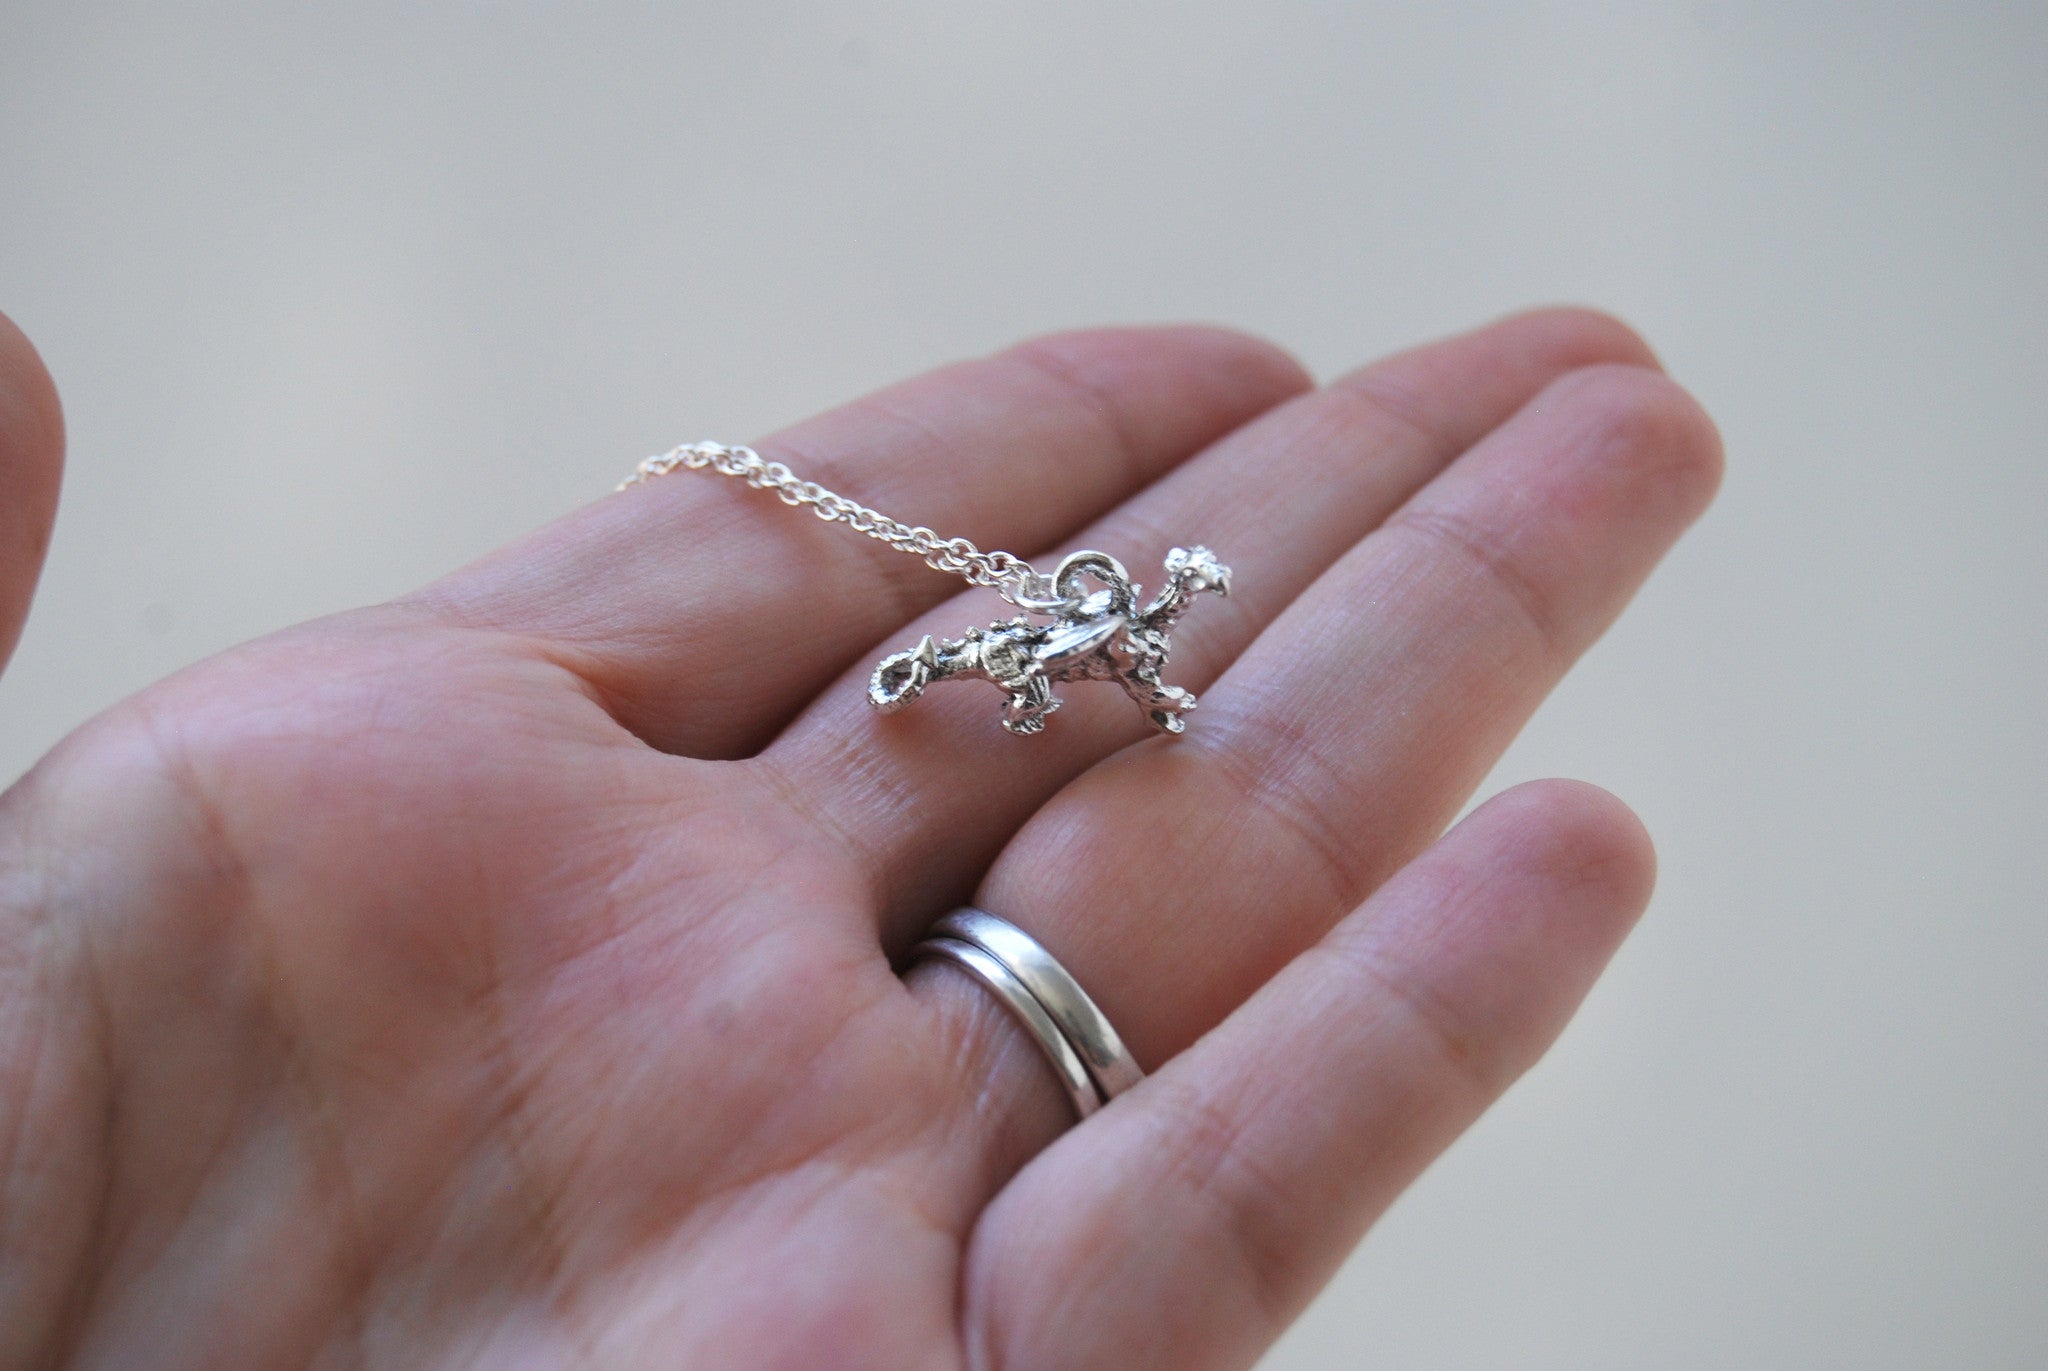 Teeny Tiny Silver Dragon Necklace | Cute Fantasy Charm Necklace | Dragon Charm Necklace - Enchanted Leaves - Nature Jewelry - Unique Handmade Gifts